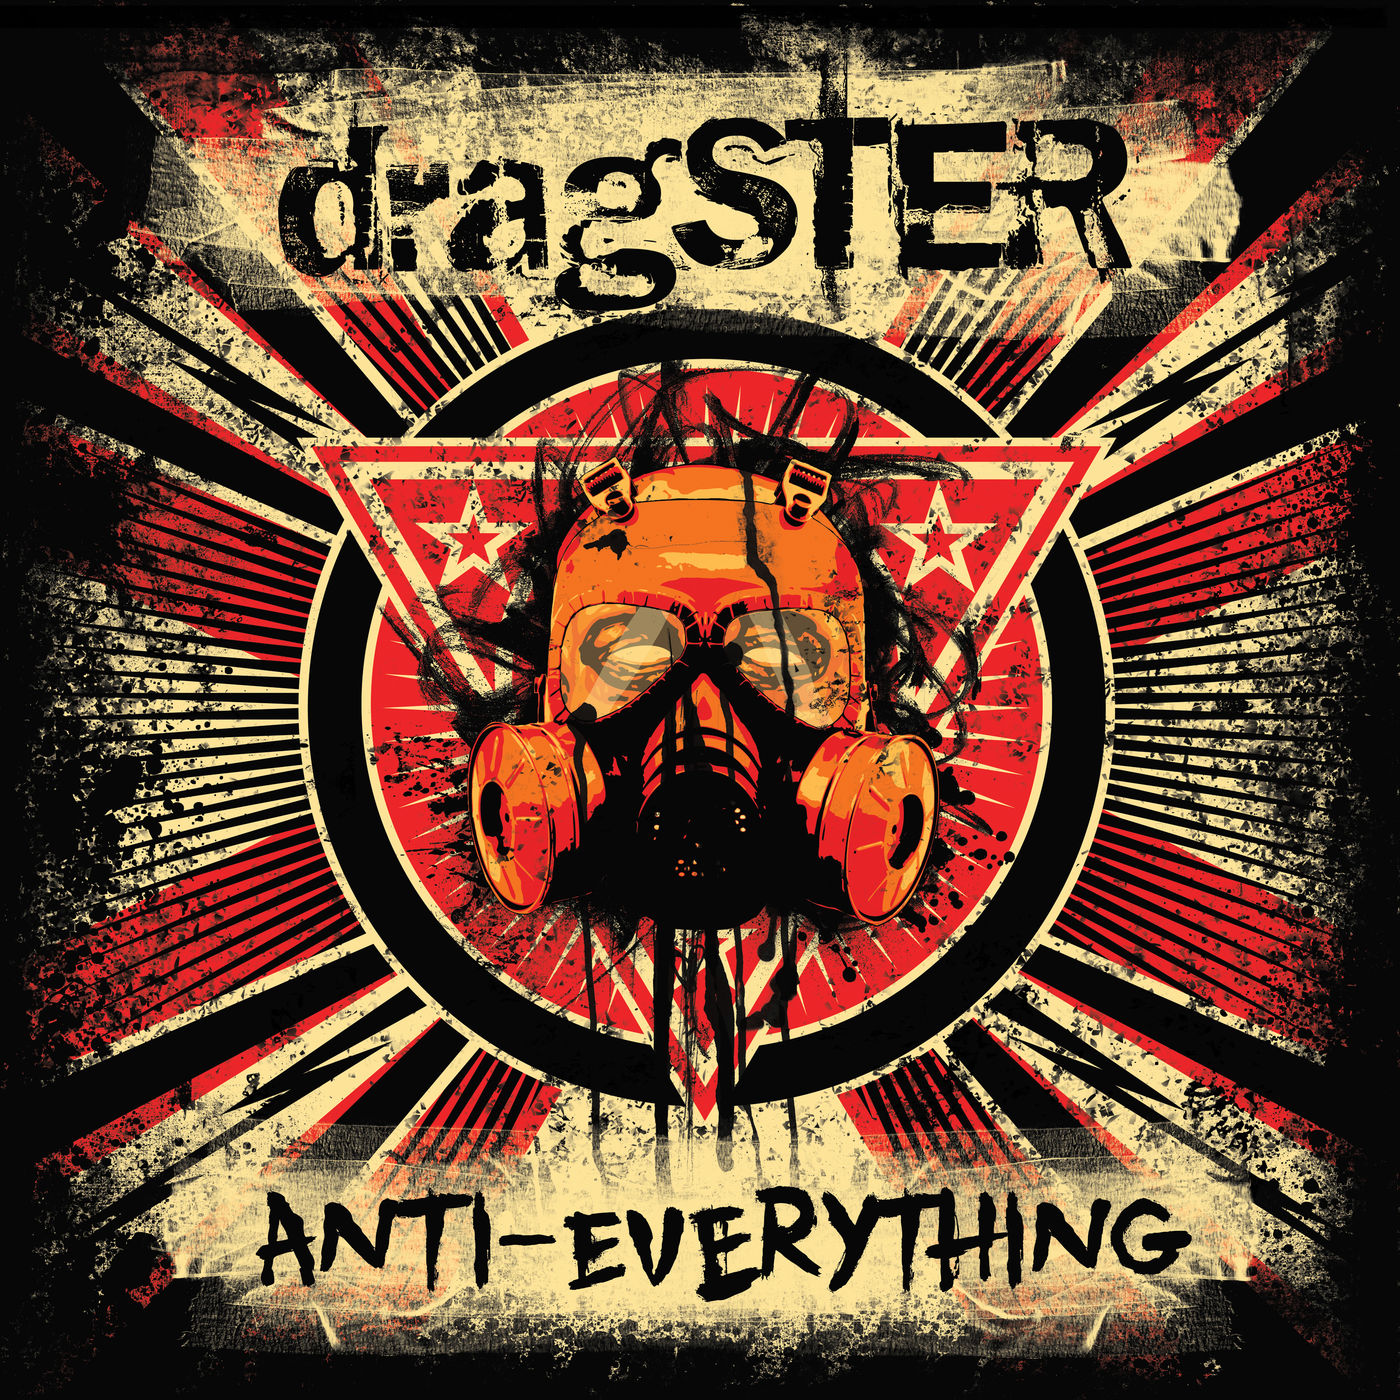 Dragster - Anti-Everything (2018) Album Info